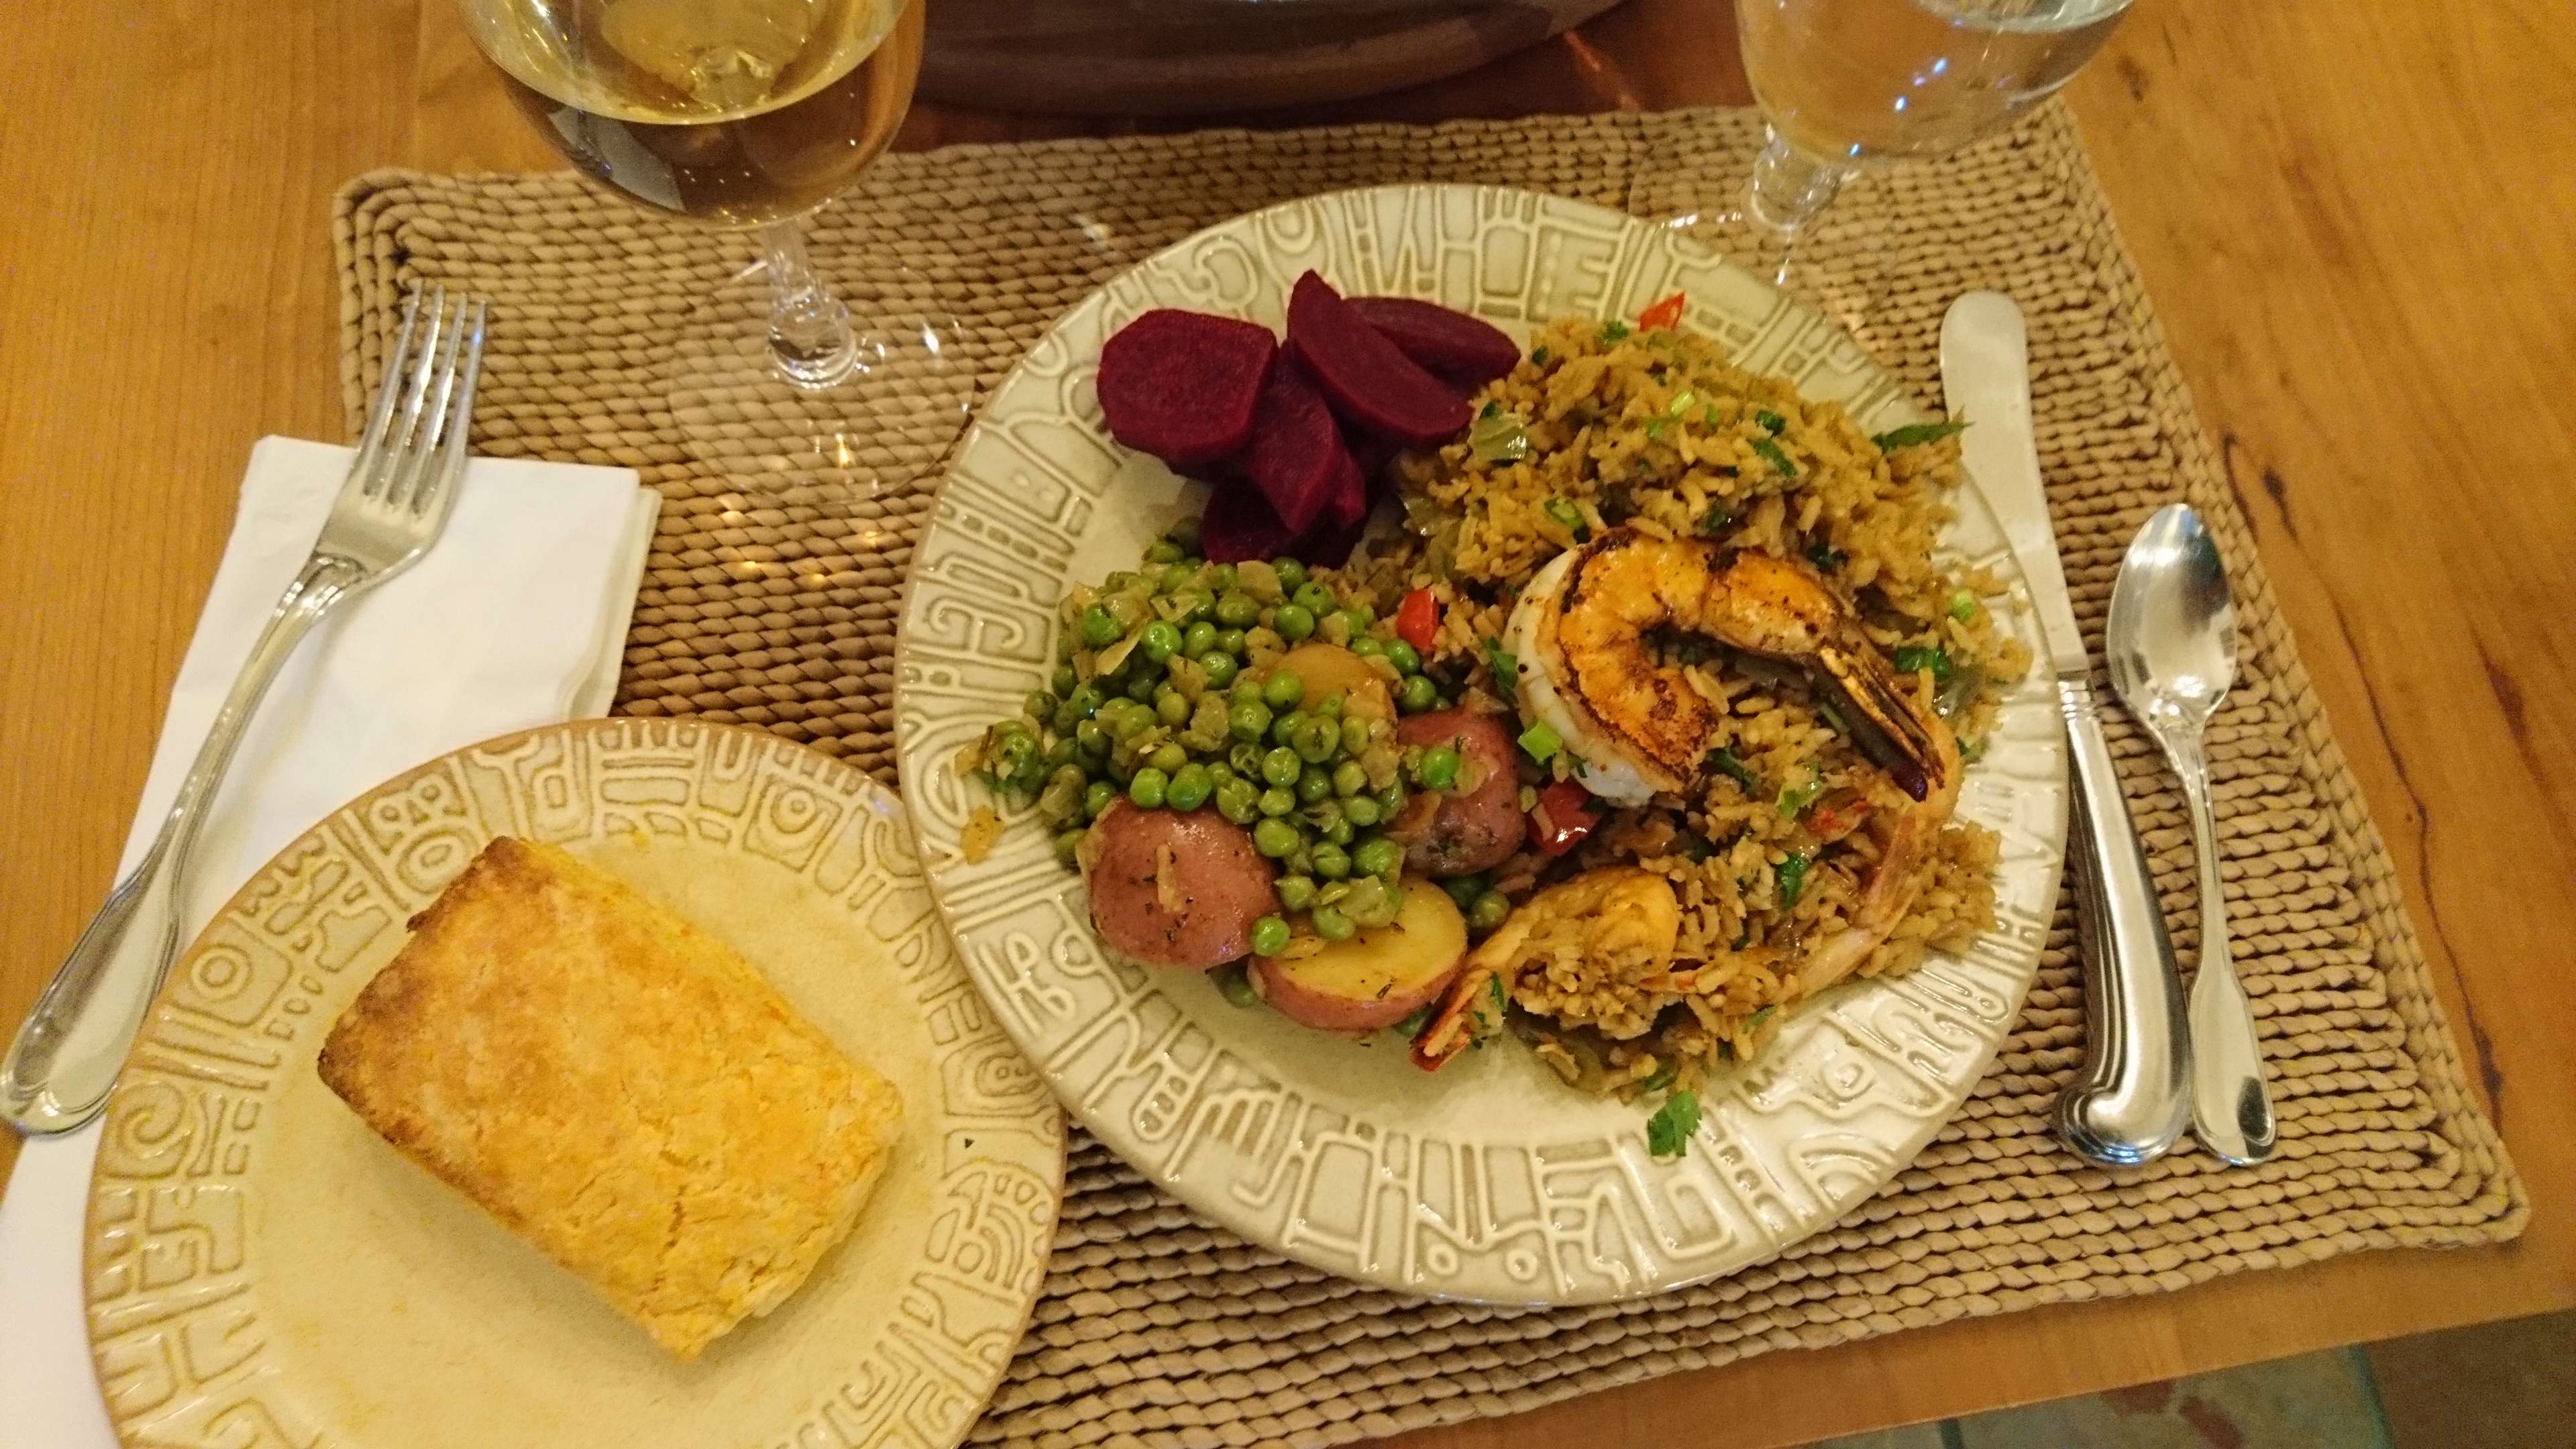 dinner setting with biscuit, jambalaya, peas, and beets